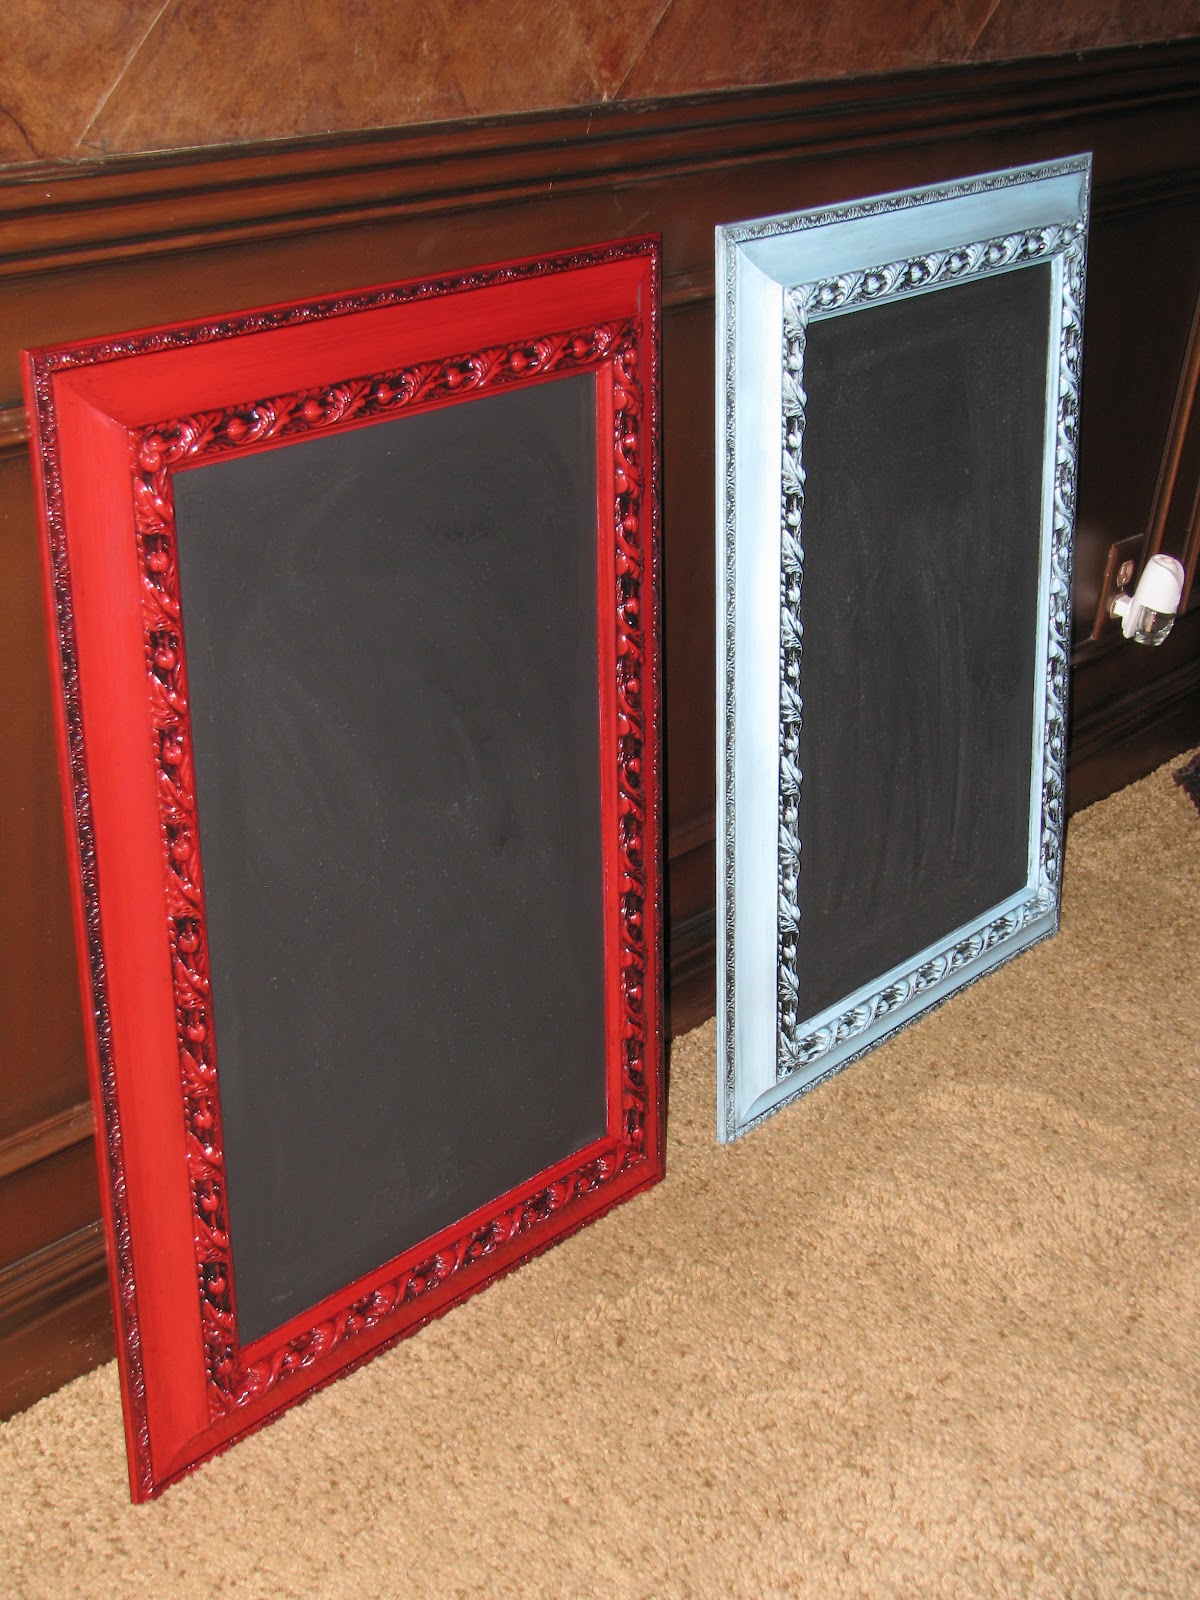 Making your own oversized chalkboard